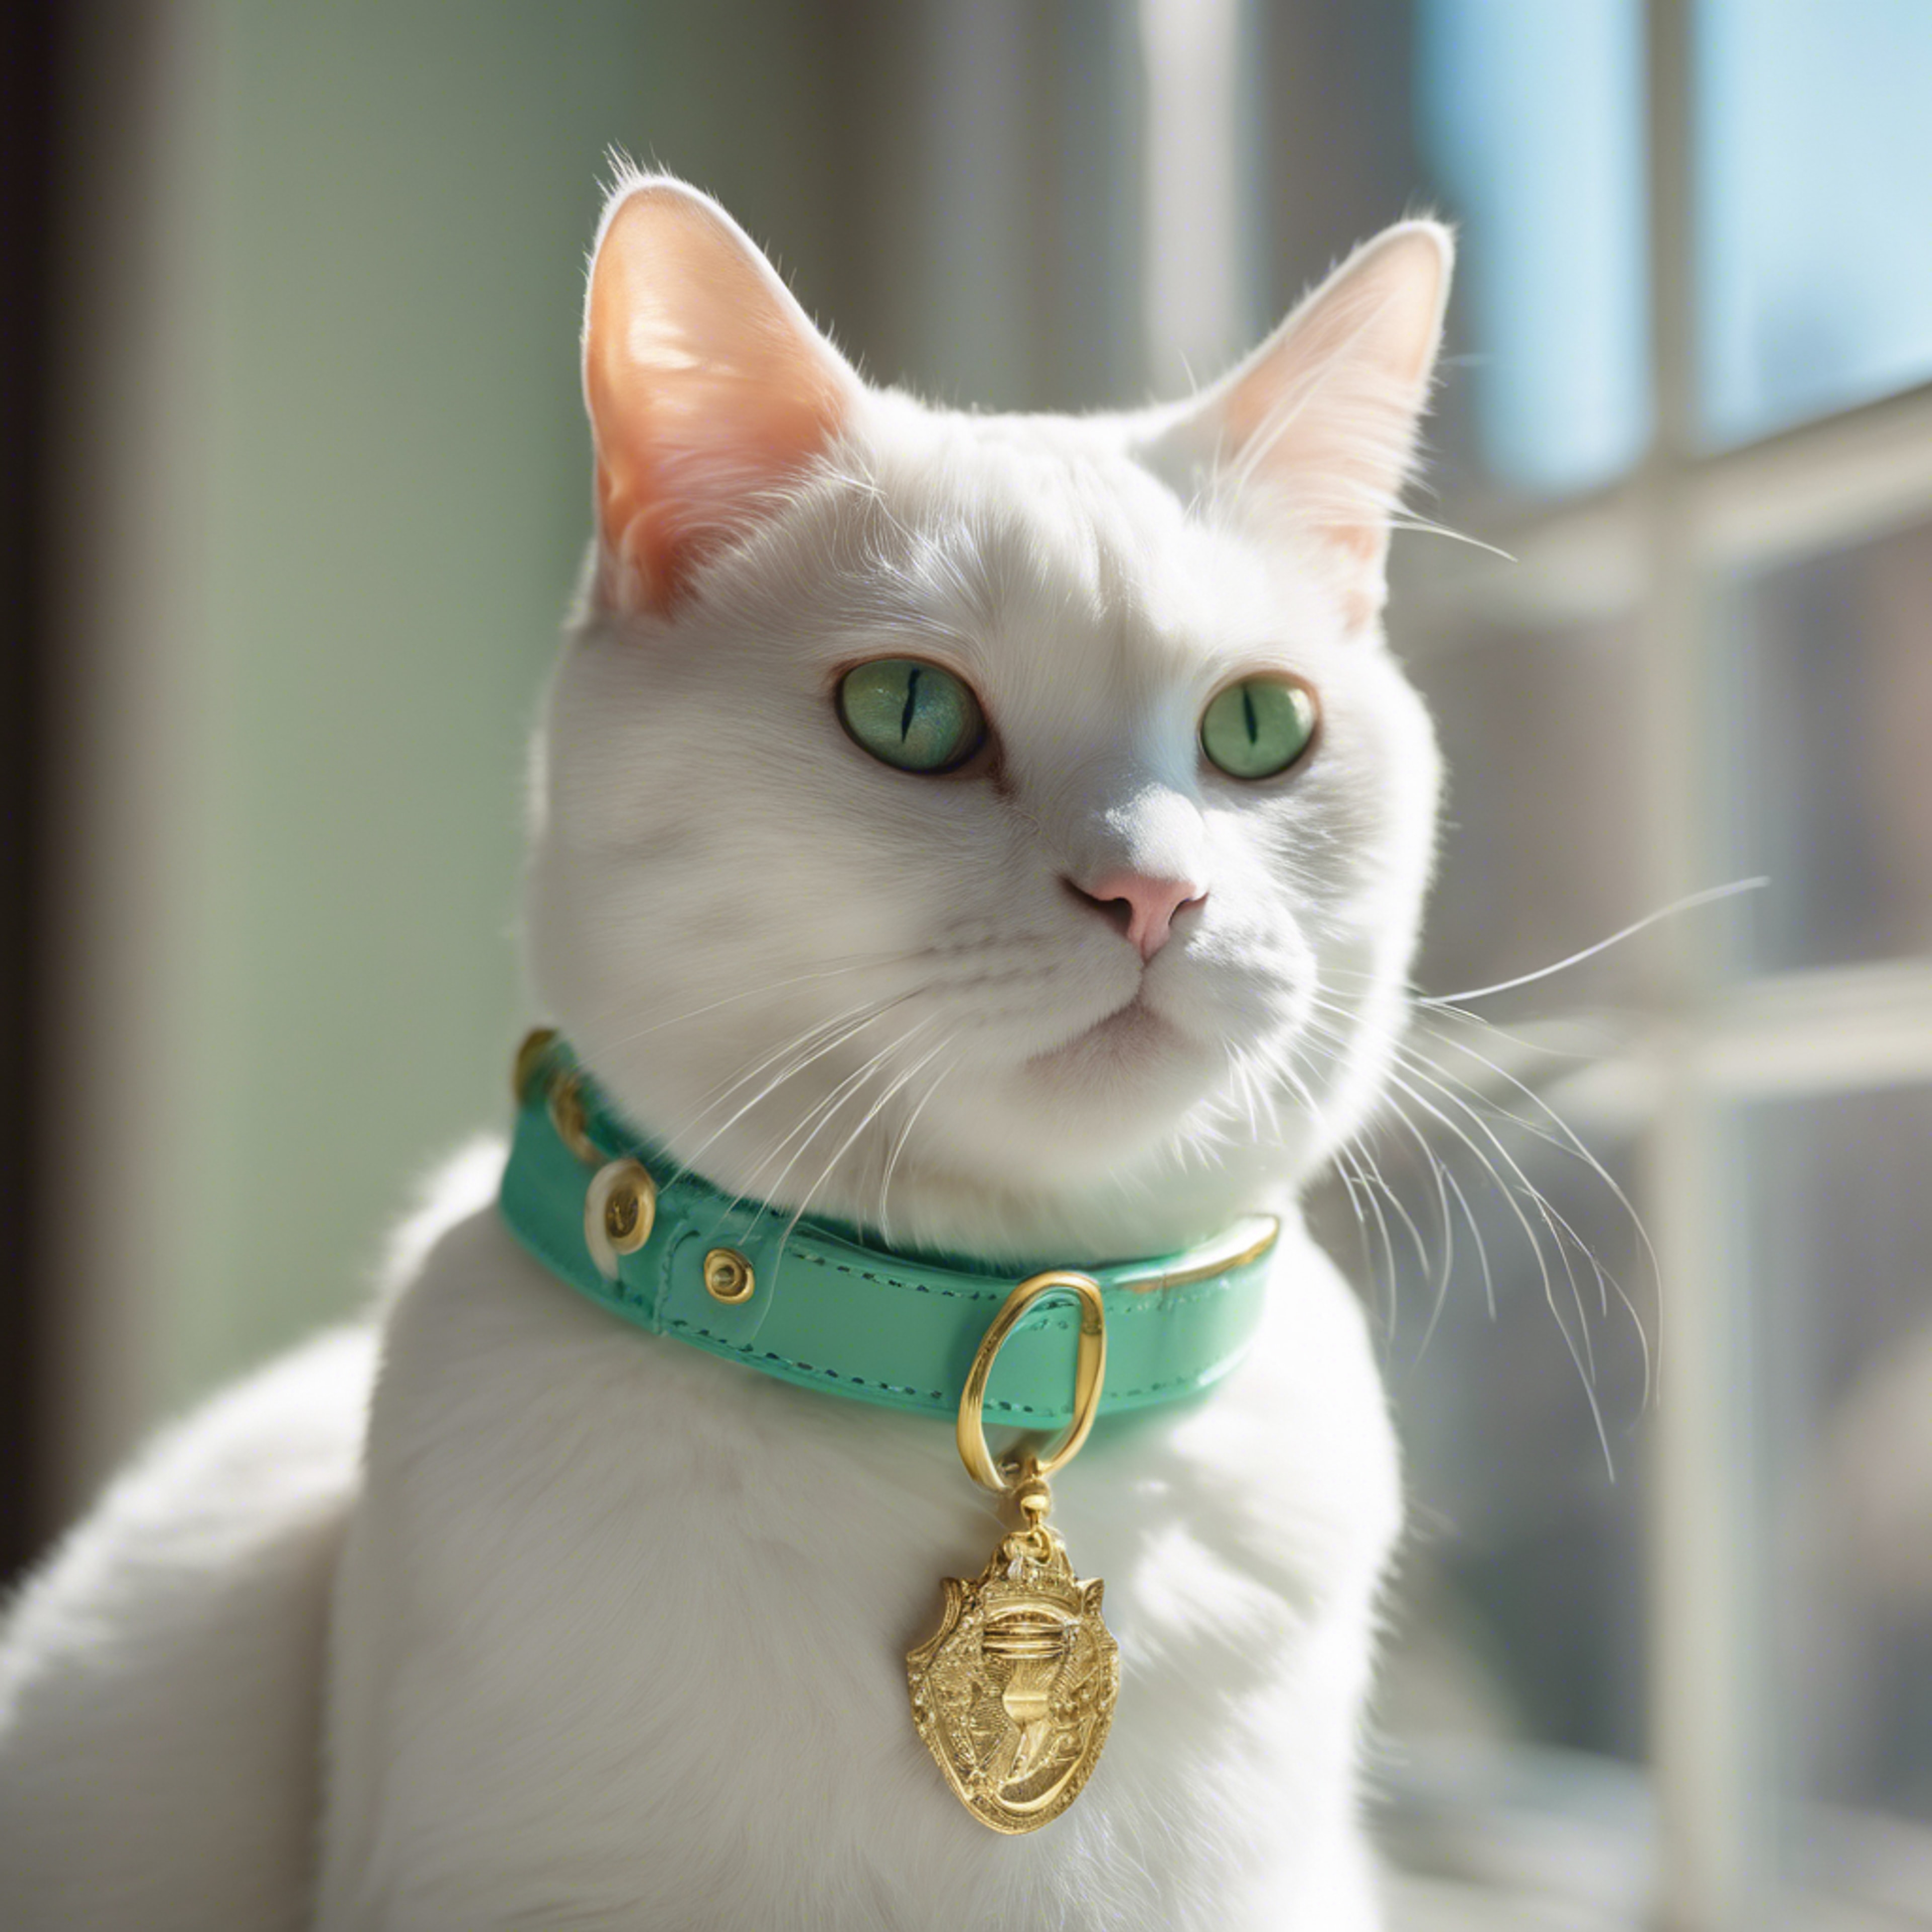 An adorable white cat wearing a preppy mint green collar with a gold buckle sitting in a sunny window. Wallpaper[8de0351476e04873aa5e]